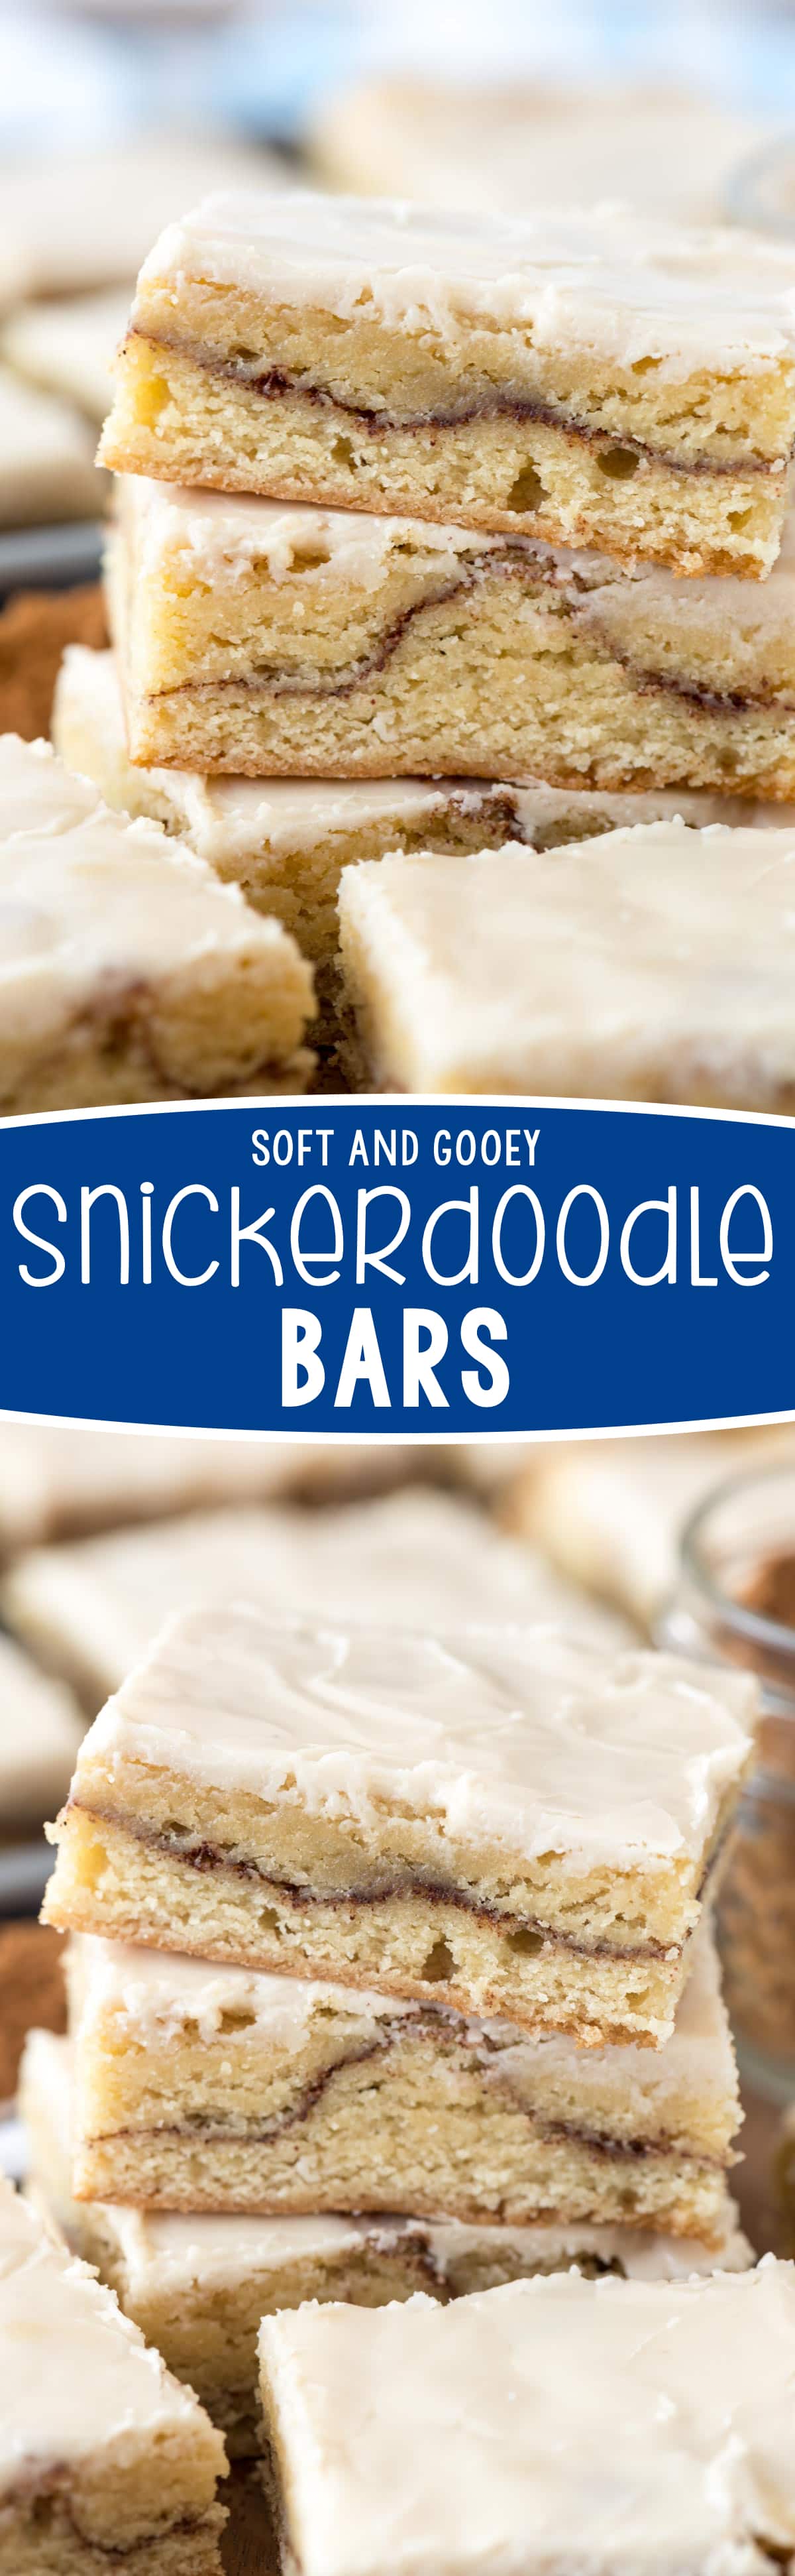 stack of snickerdoodle bars on cutting board